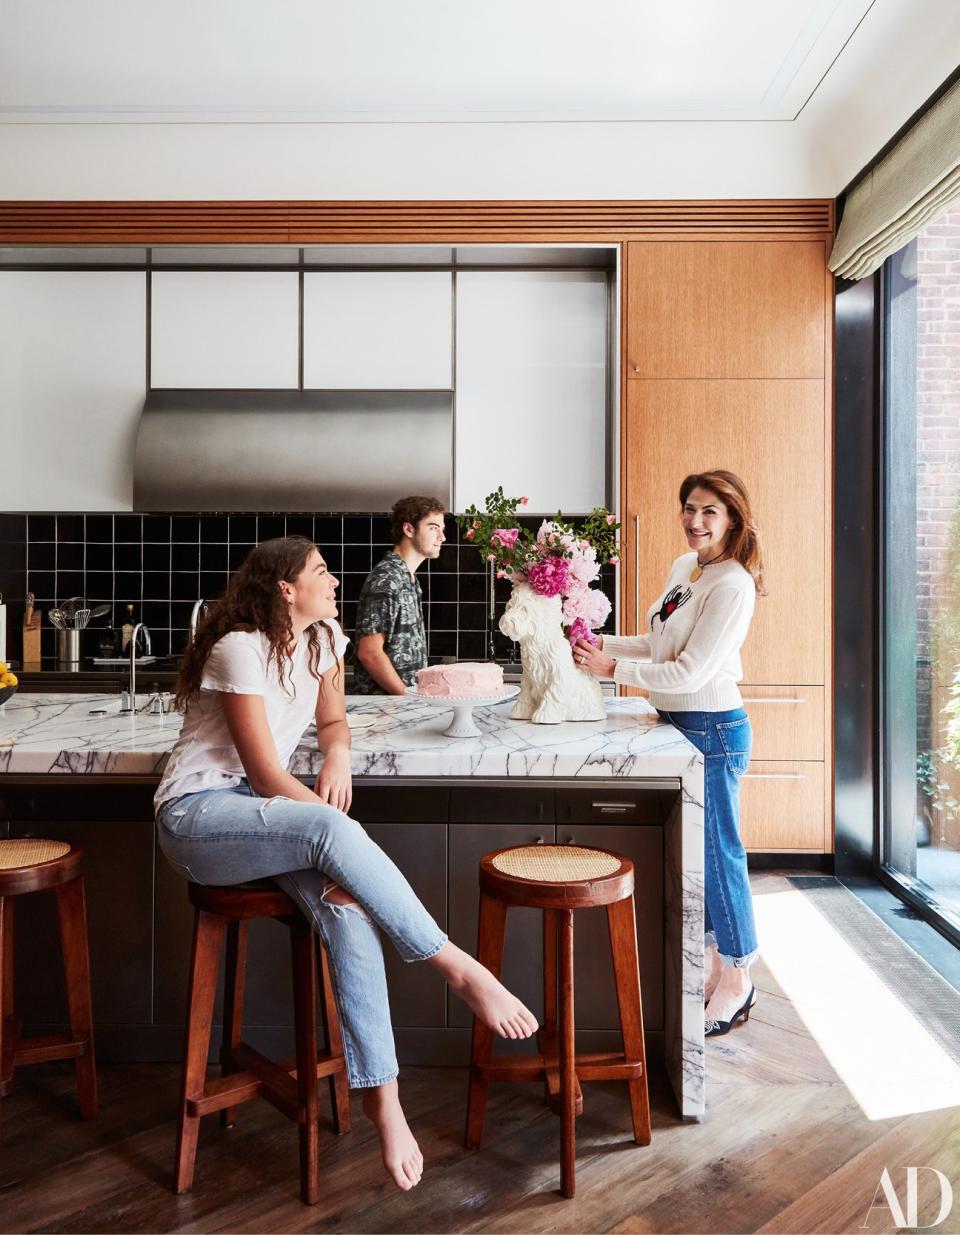 Allison, wearing a Dior sweater and jeans, and two of her children gather around the kitchen island; fashion styling by Marina Muñoz.